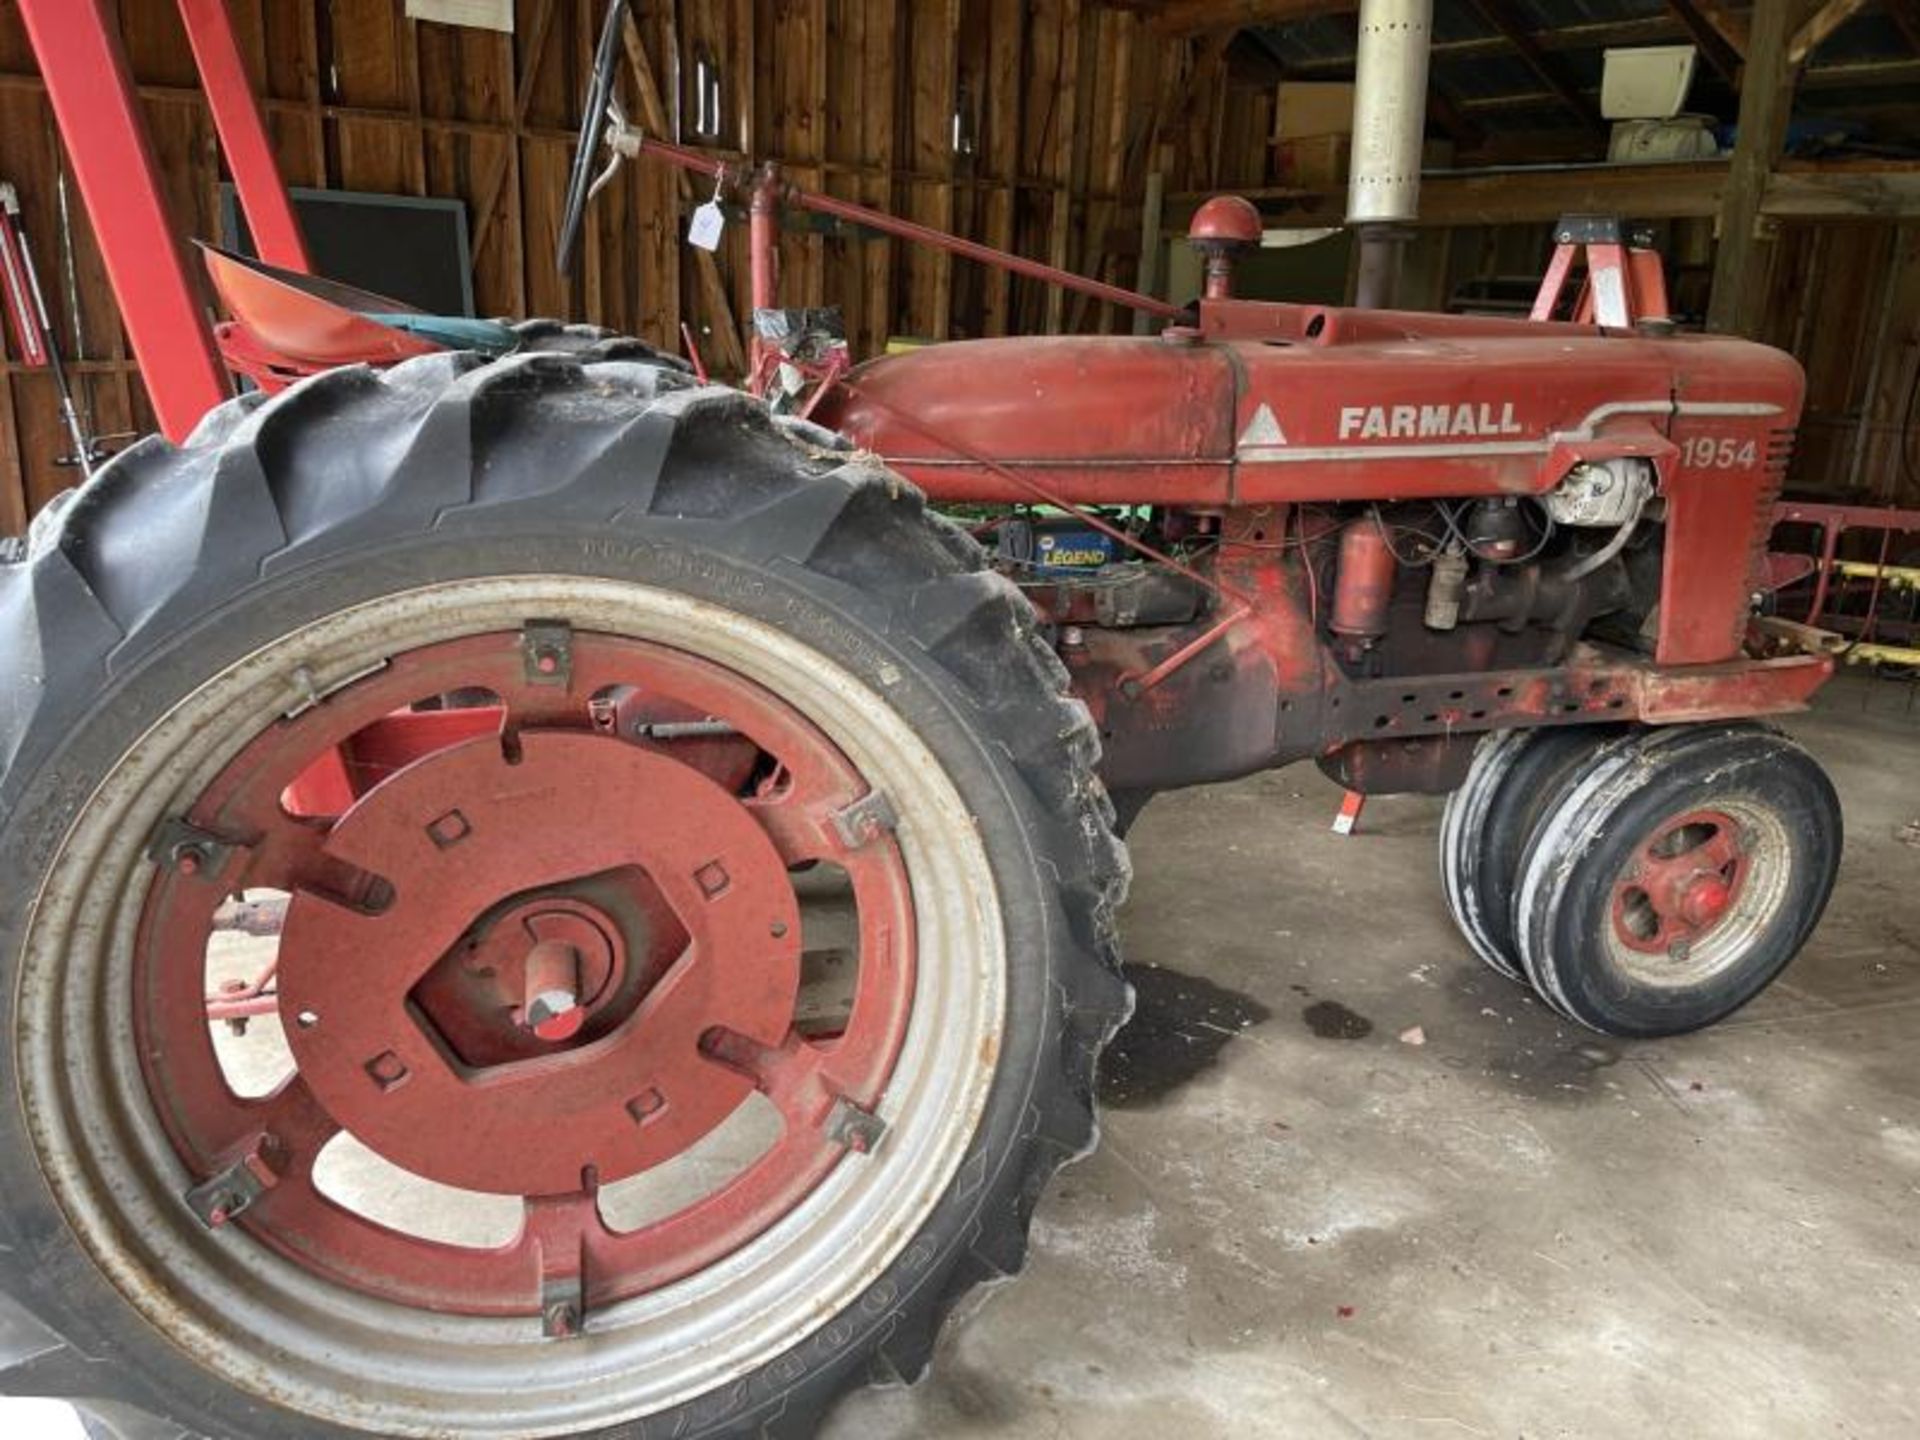 Farmall Tractor Believed To Be 1954, Row-CropFarmall Tractor Believed To Be 1954, Row-Crop - Image 20 of 35